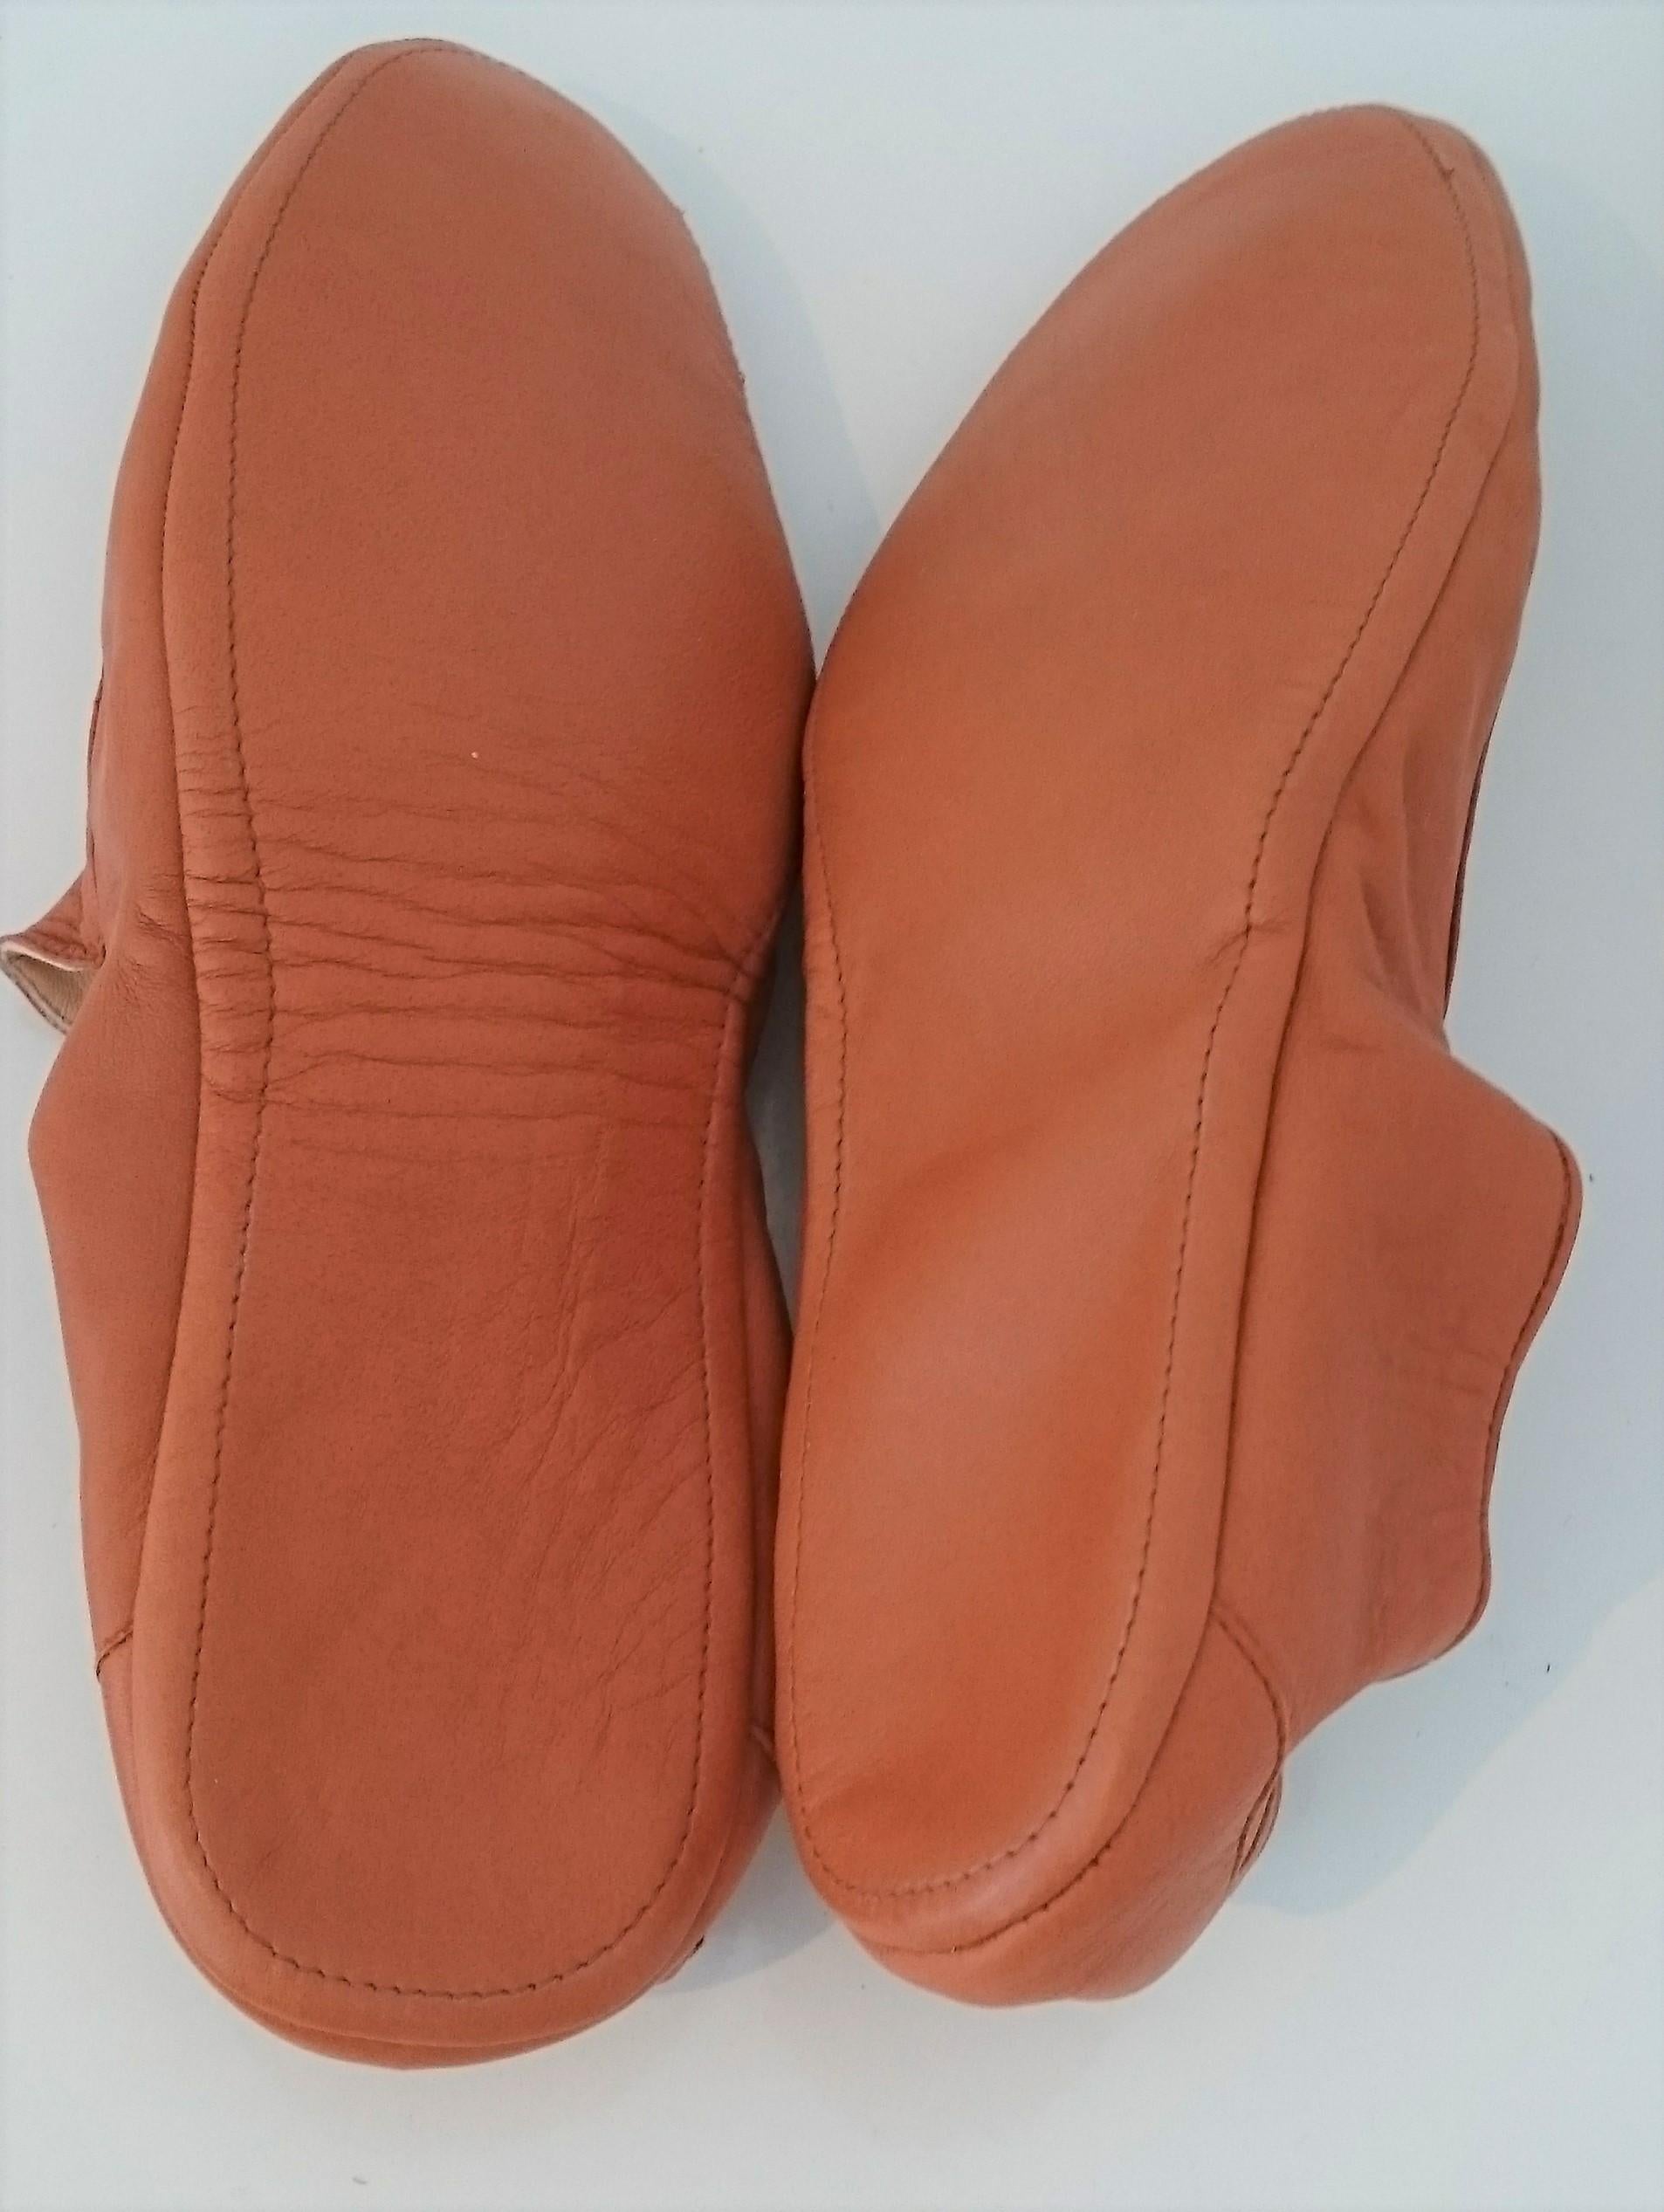 John Lobb Leather Slippers for Home. Size 41 (EU) 1